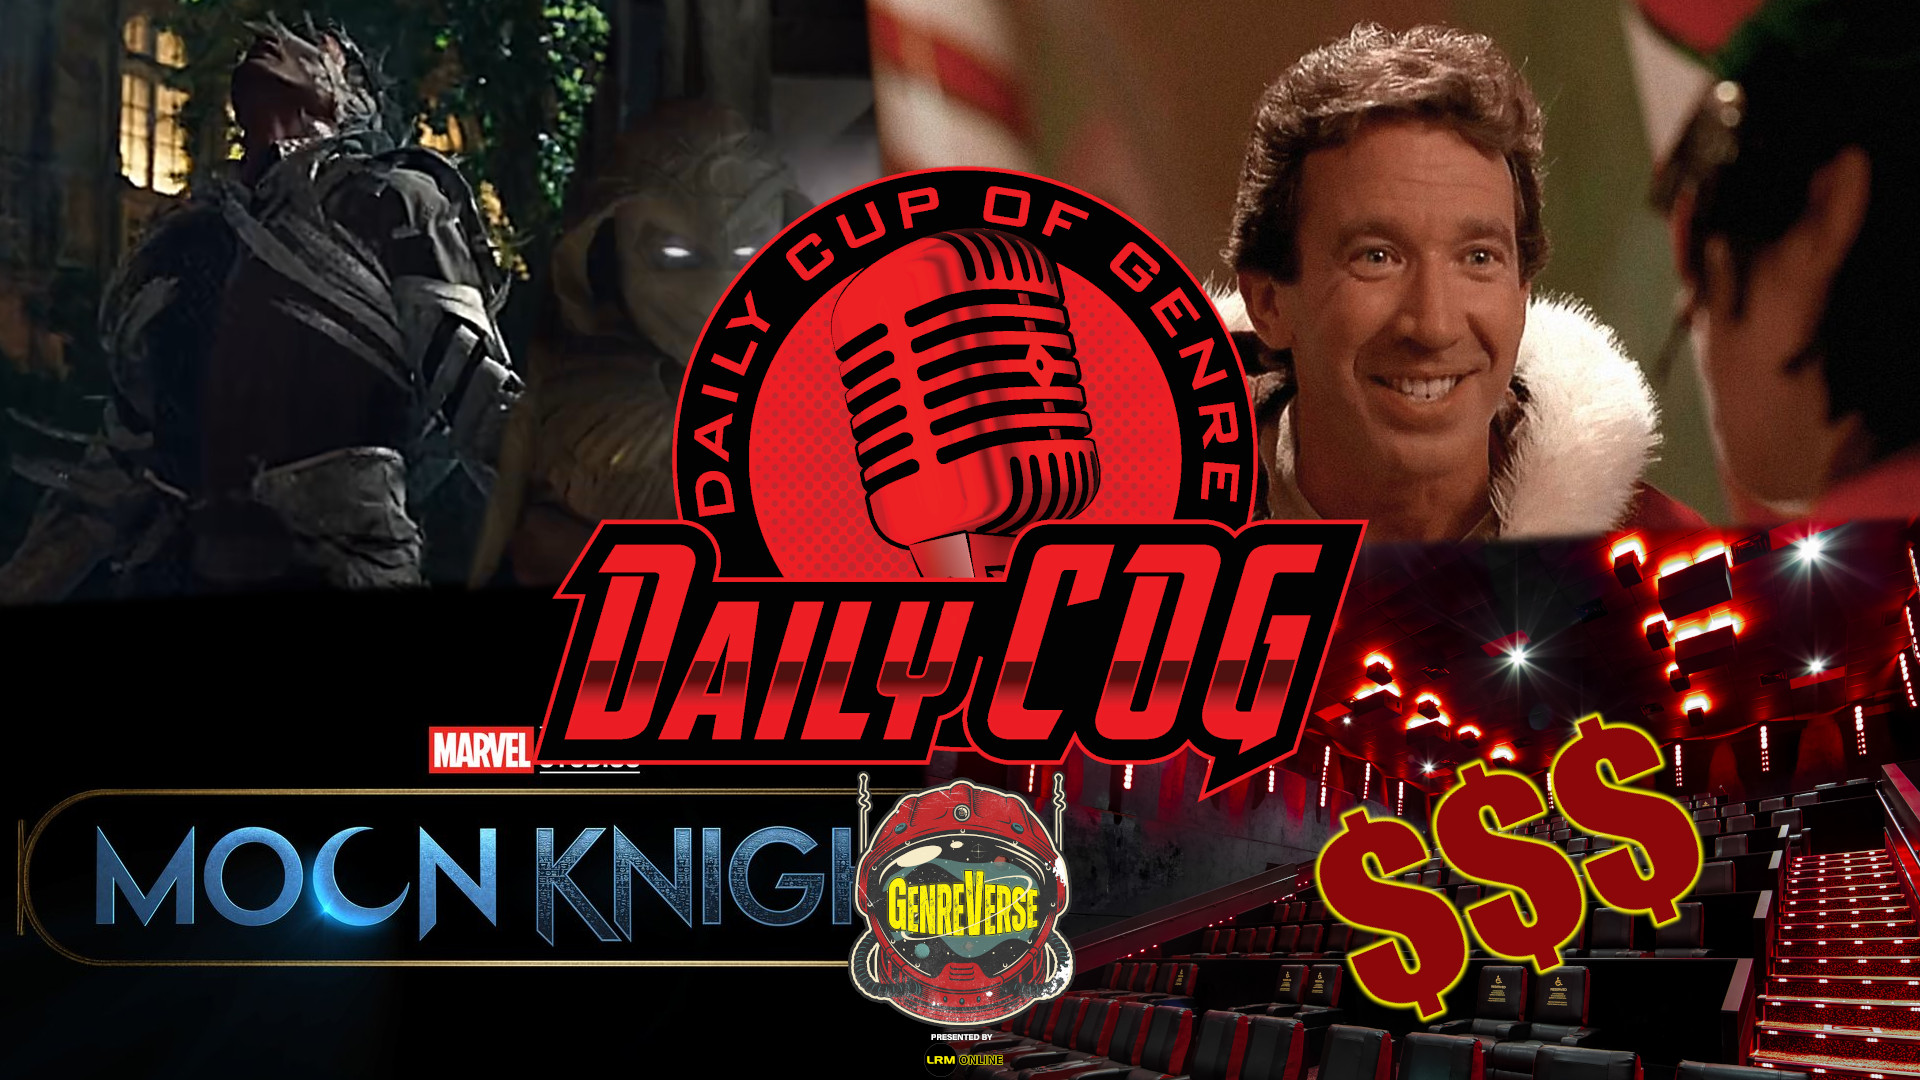 Moon Knight Teaser Reaction, Weekend Box Office Numbers, The Santa Clause Getting A Sequel Series On Disney+  | Daily COG